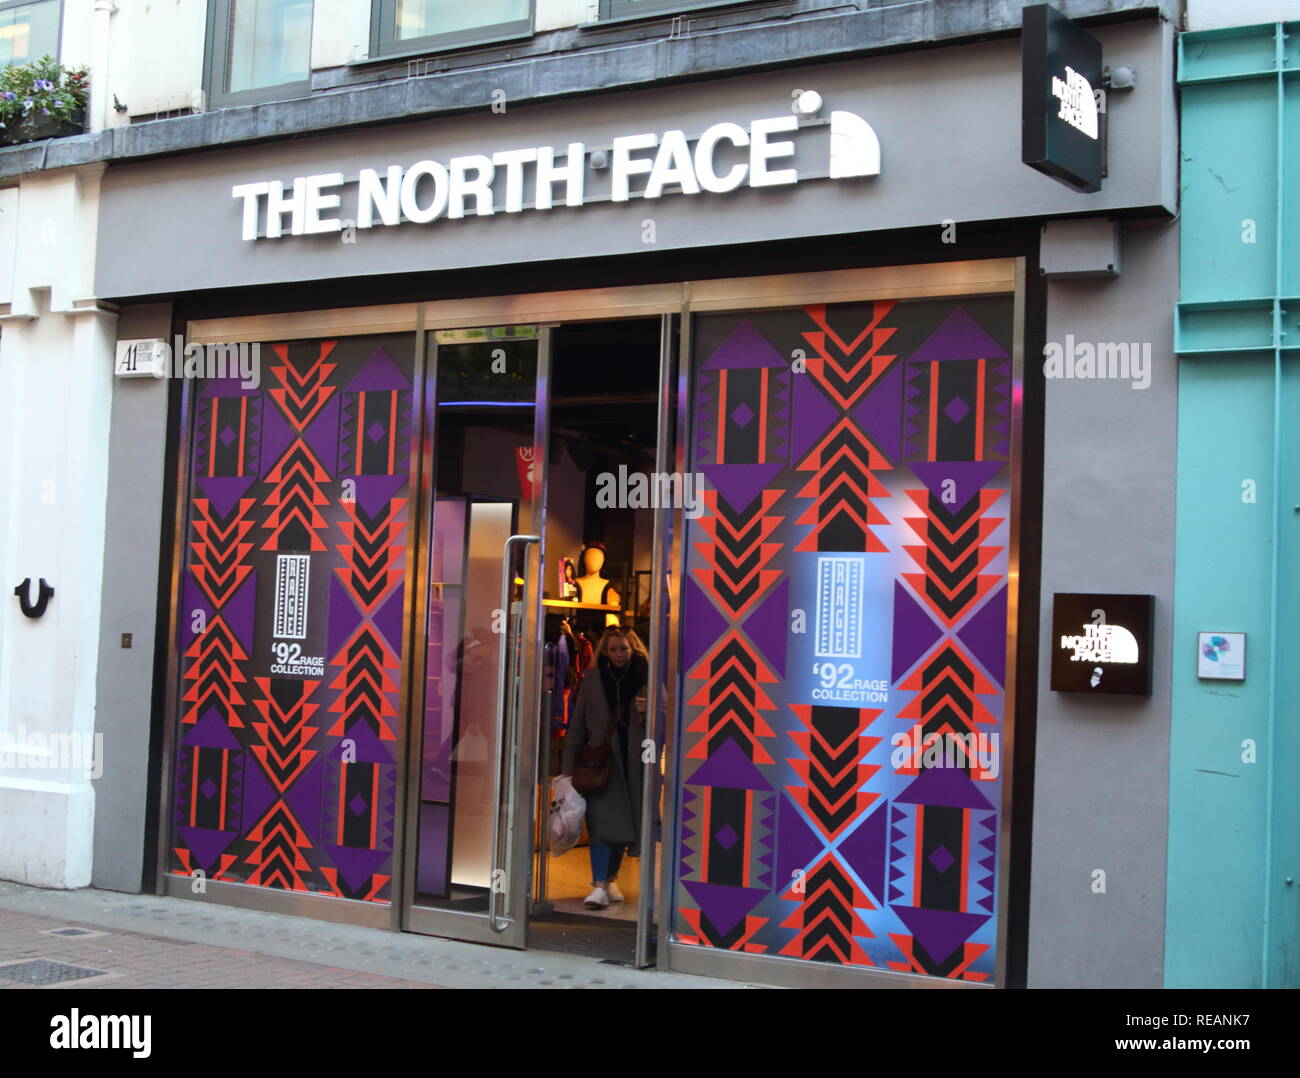 The North Face brand logo seen in Carnaby Street in London, UK Stock Photo  - Alamy